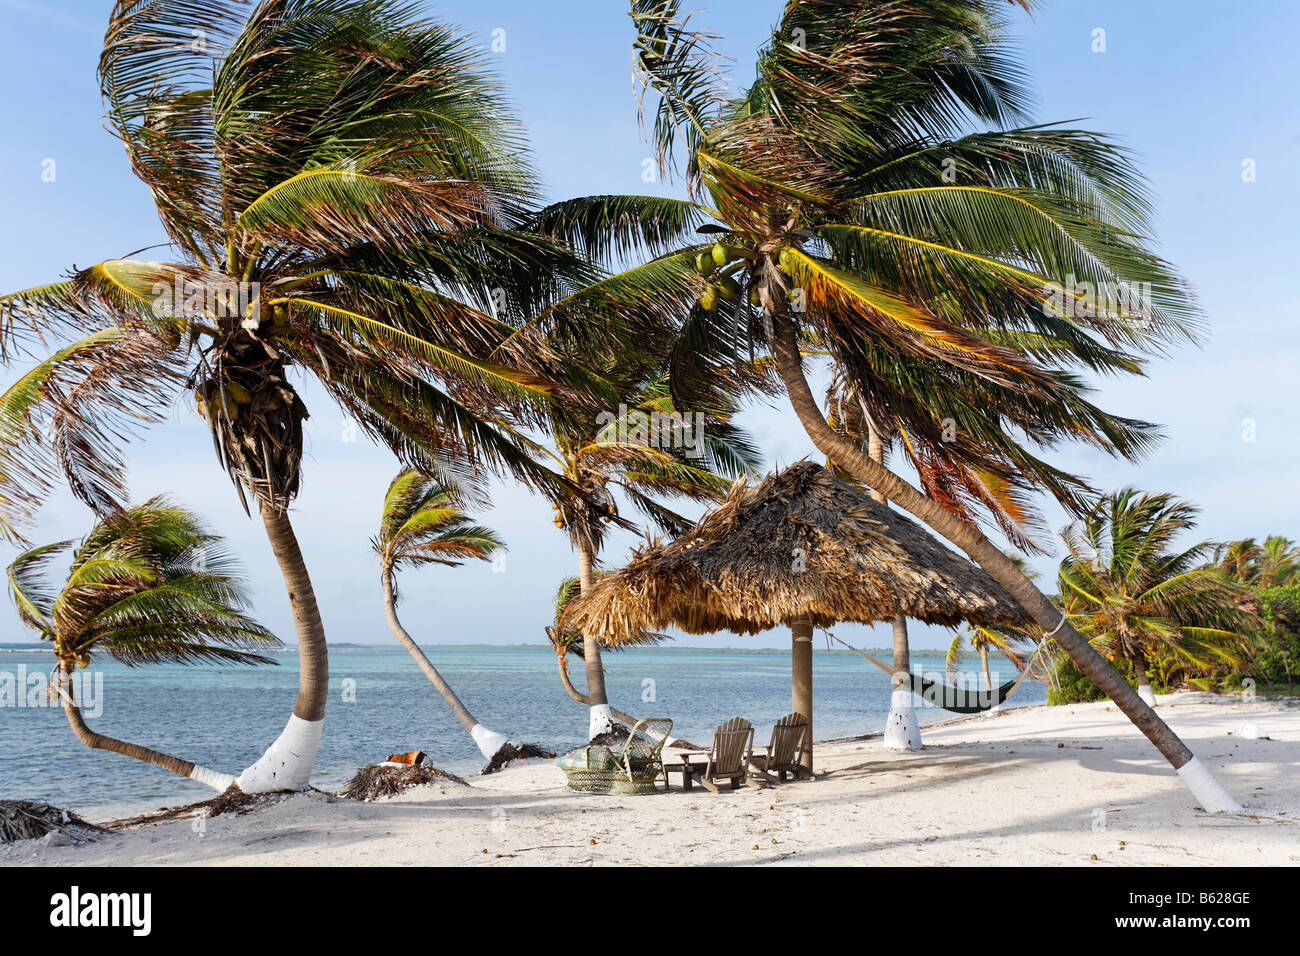 Beach with palm trees, Turneffe Flats, Turneffe Atoll, Belize, Central America, Caribbean Stock Photo